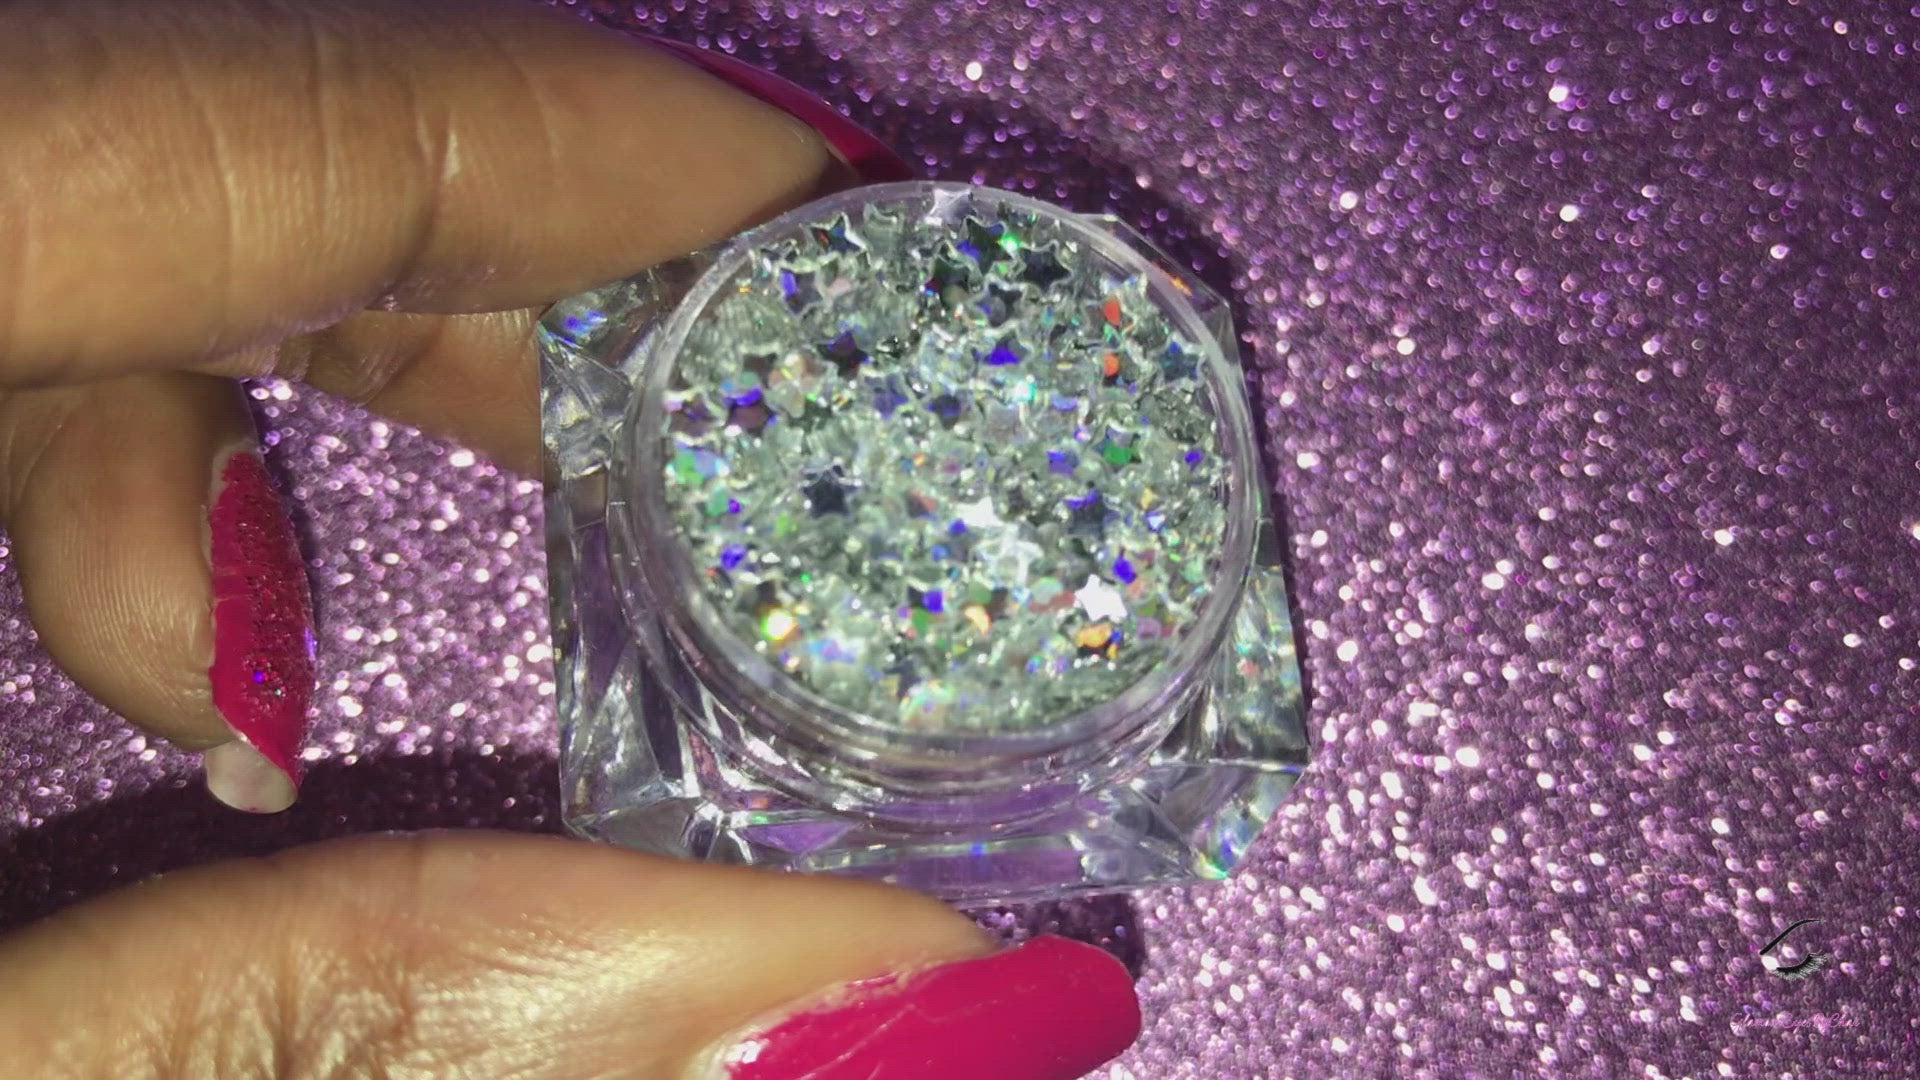 This glitter is called Holographic Silver Stars and is part of the shaped glitters collection. It consists of silver small stars with a holographic sparkle. Holographic Silver Stars can be used for your face, body, hair and nails.